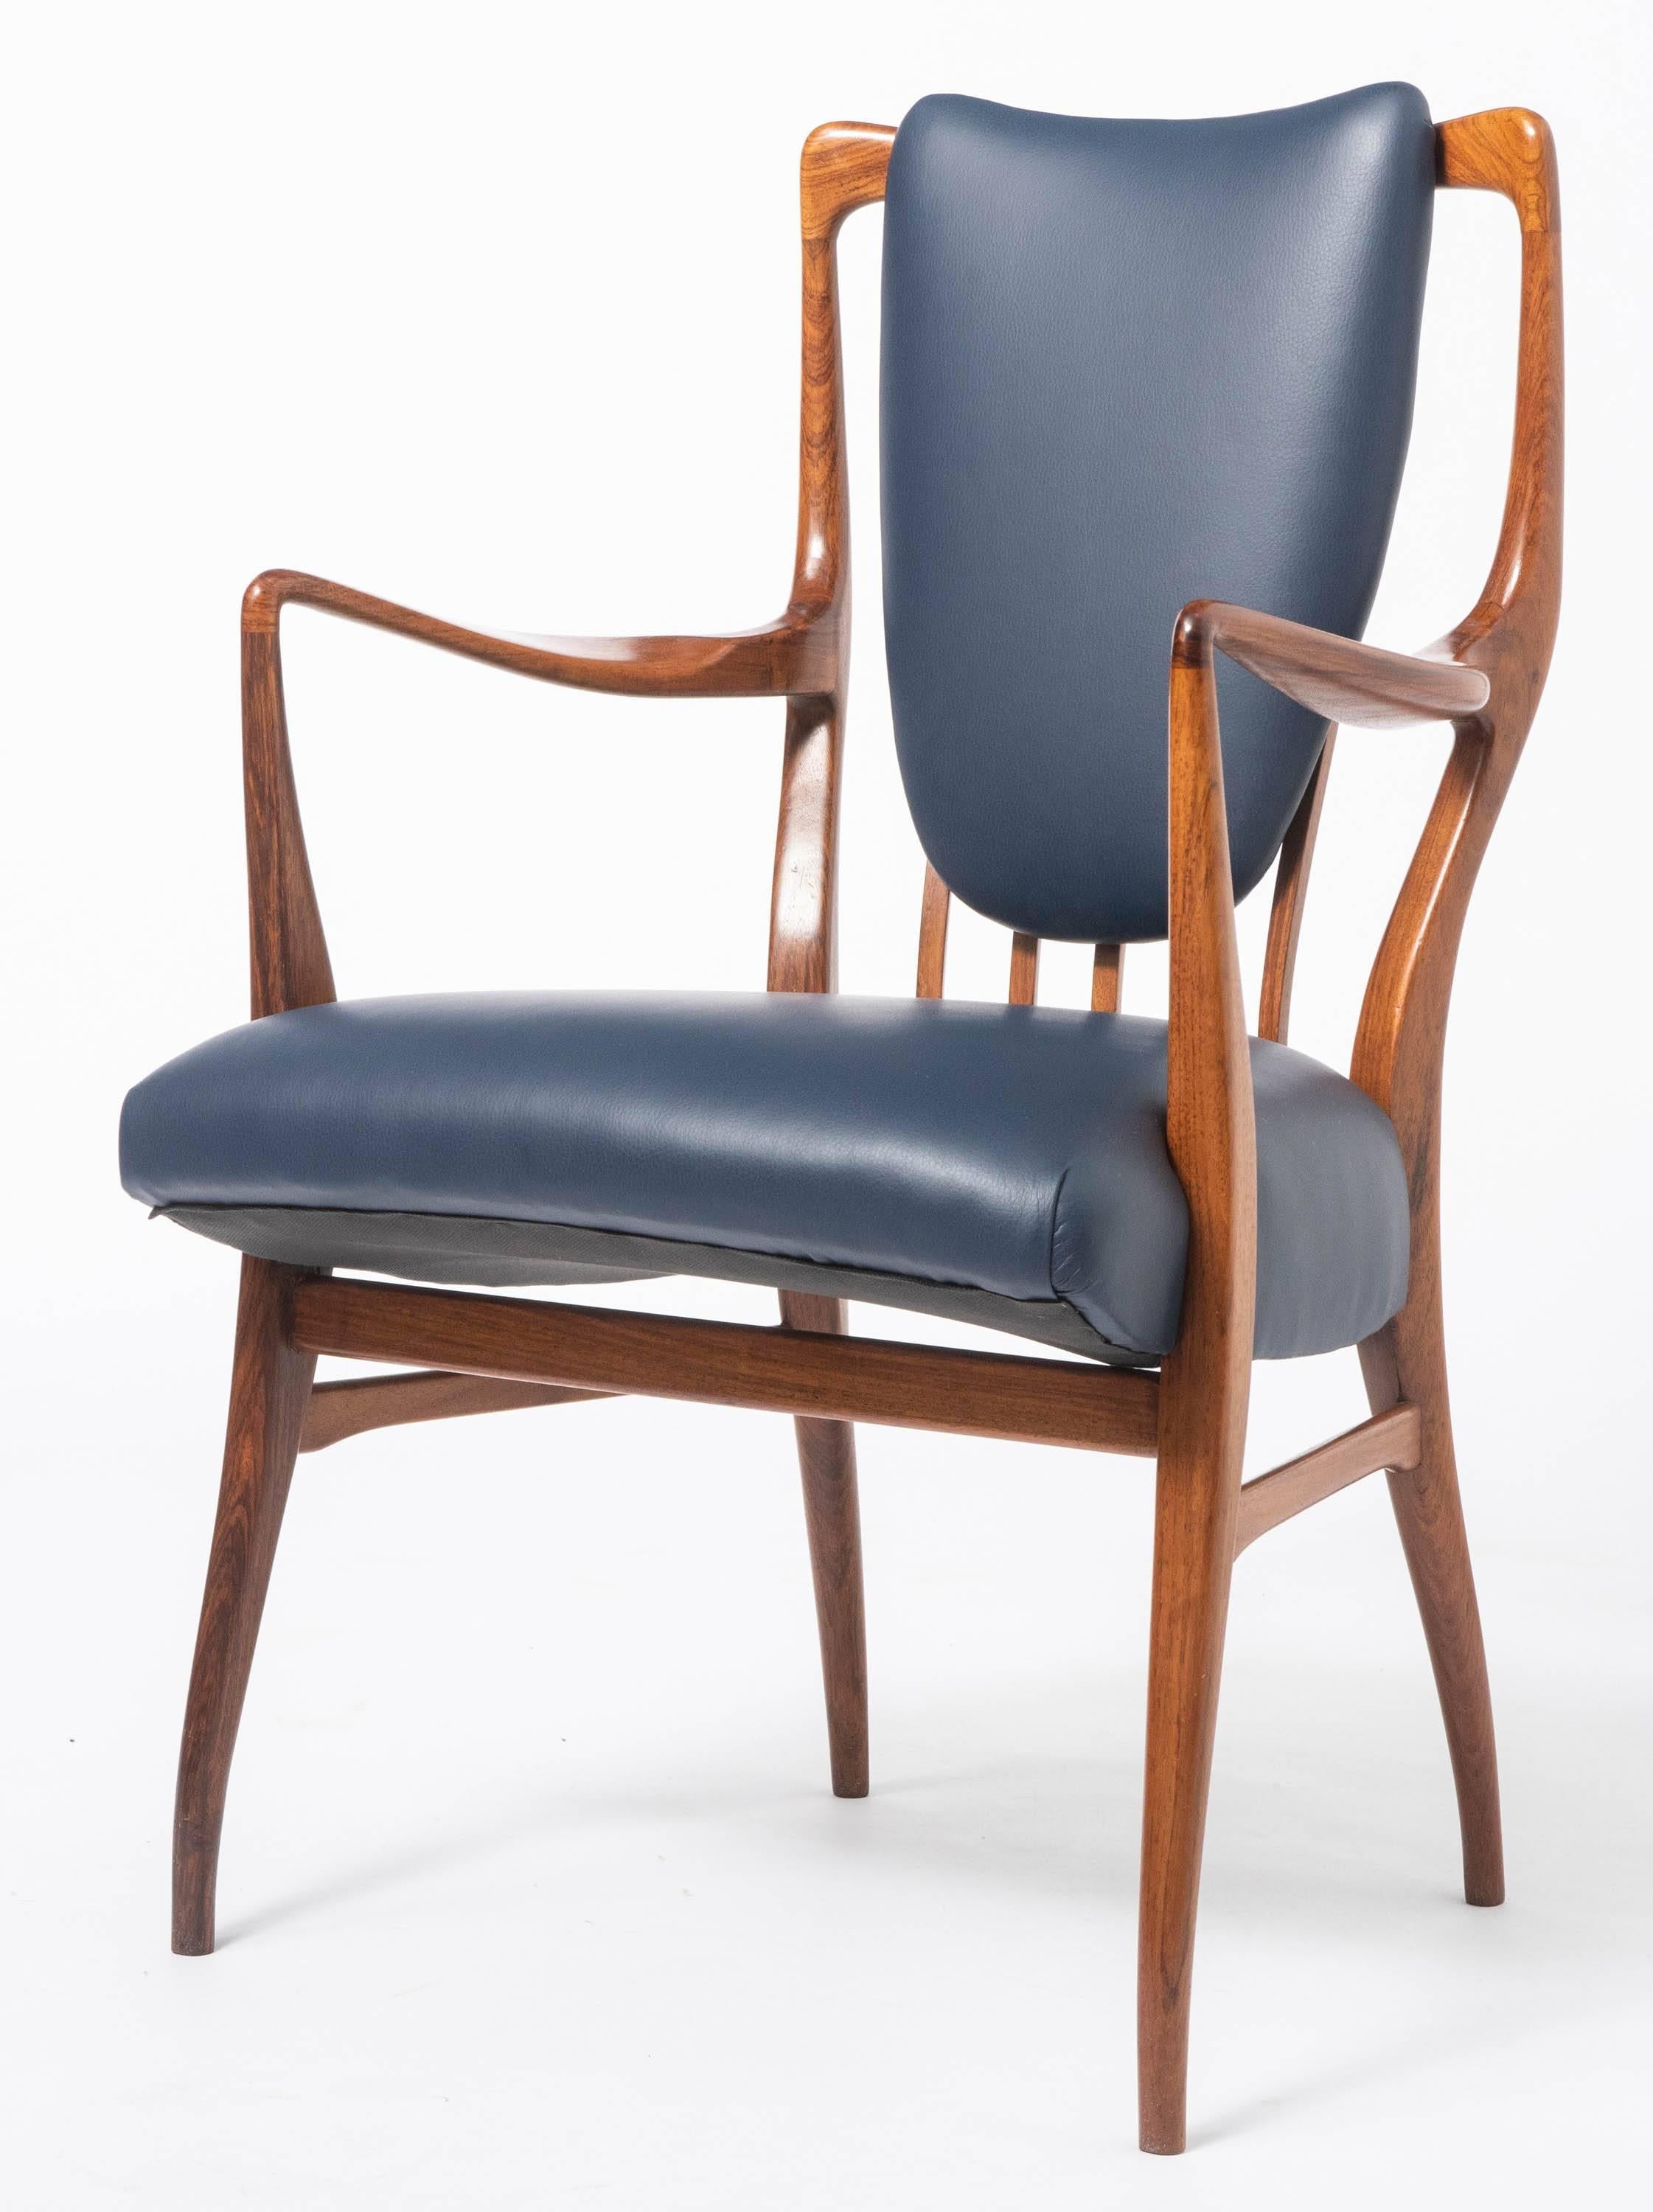 Mid-20th Century Andrew J Milne Rosewood Set of Eight Chairs, England, circa 1960